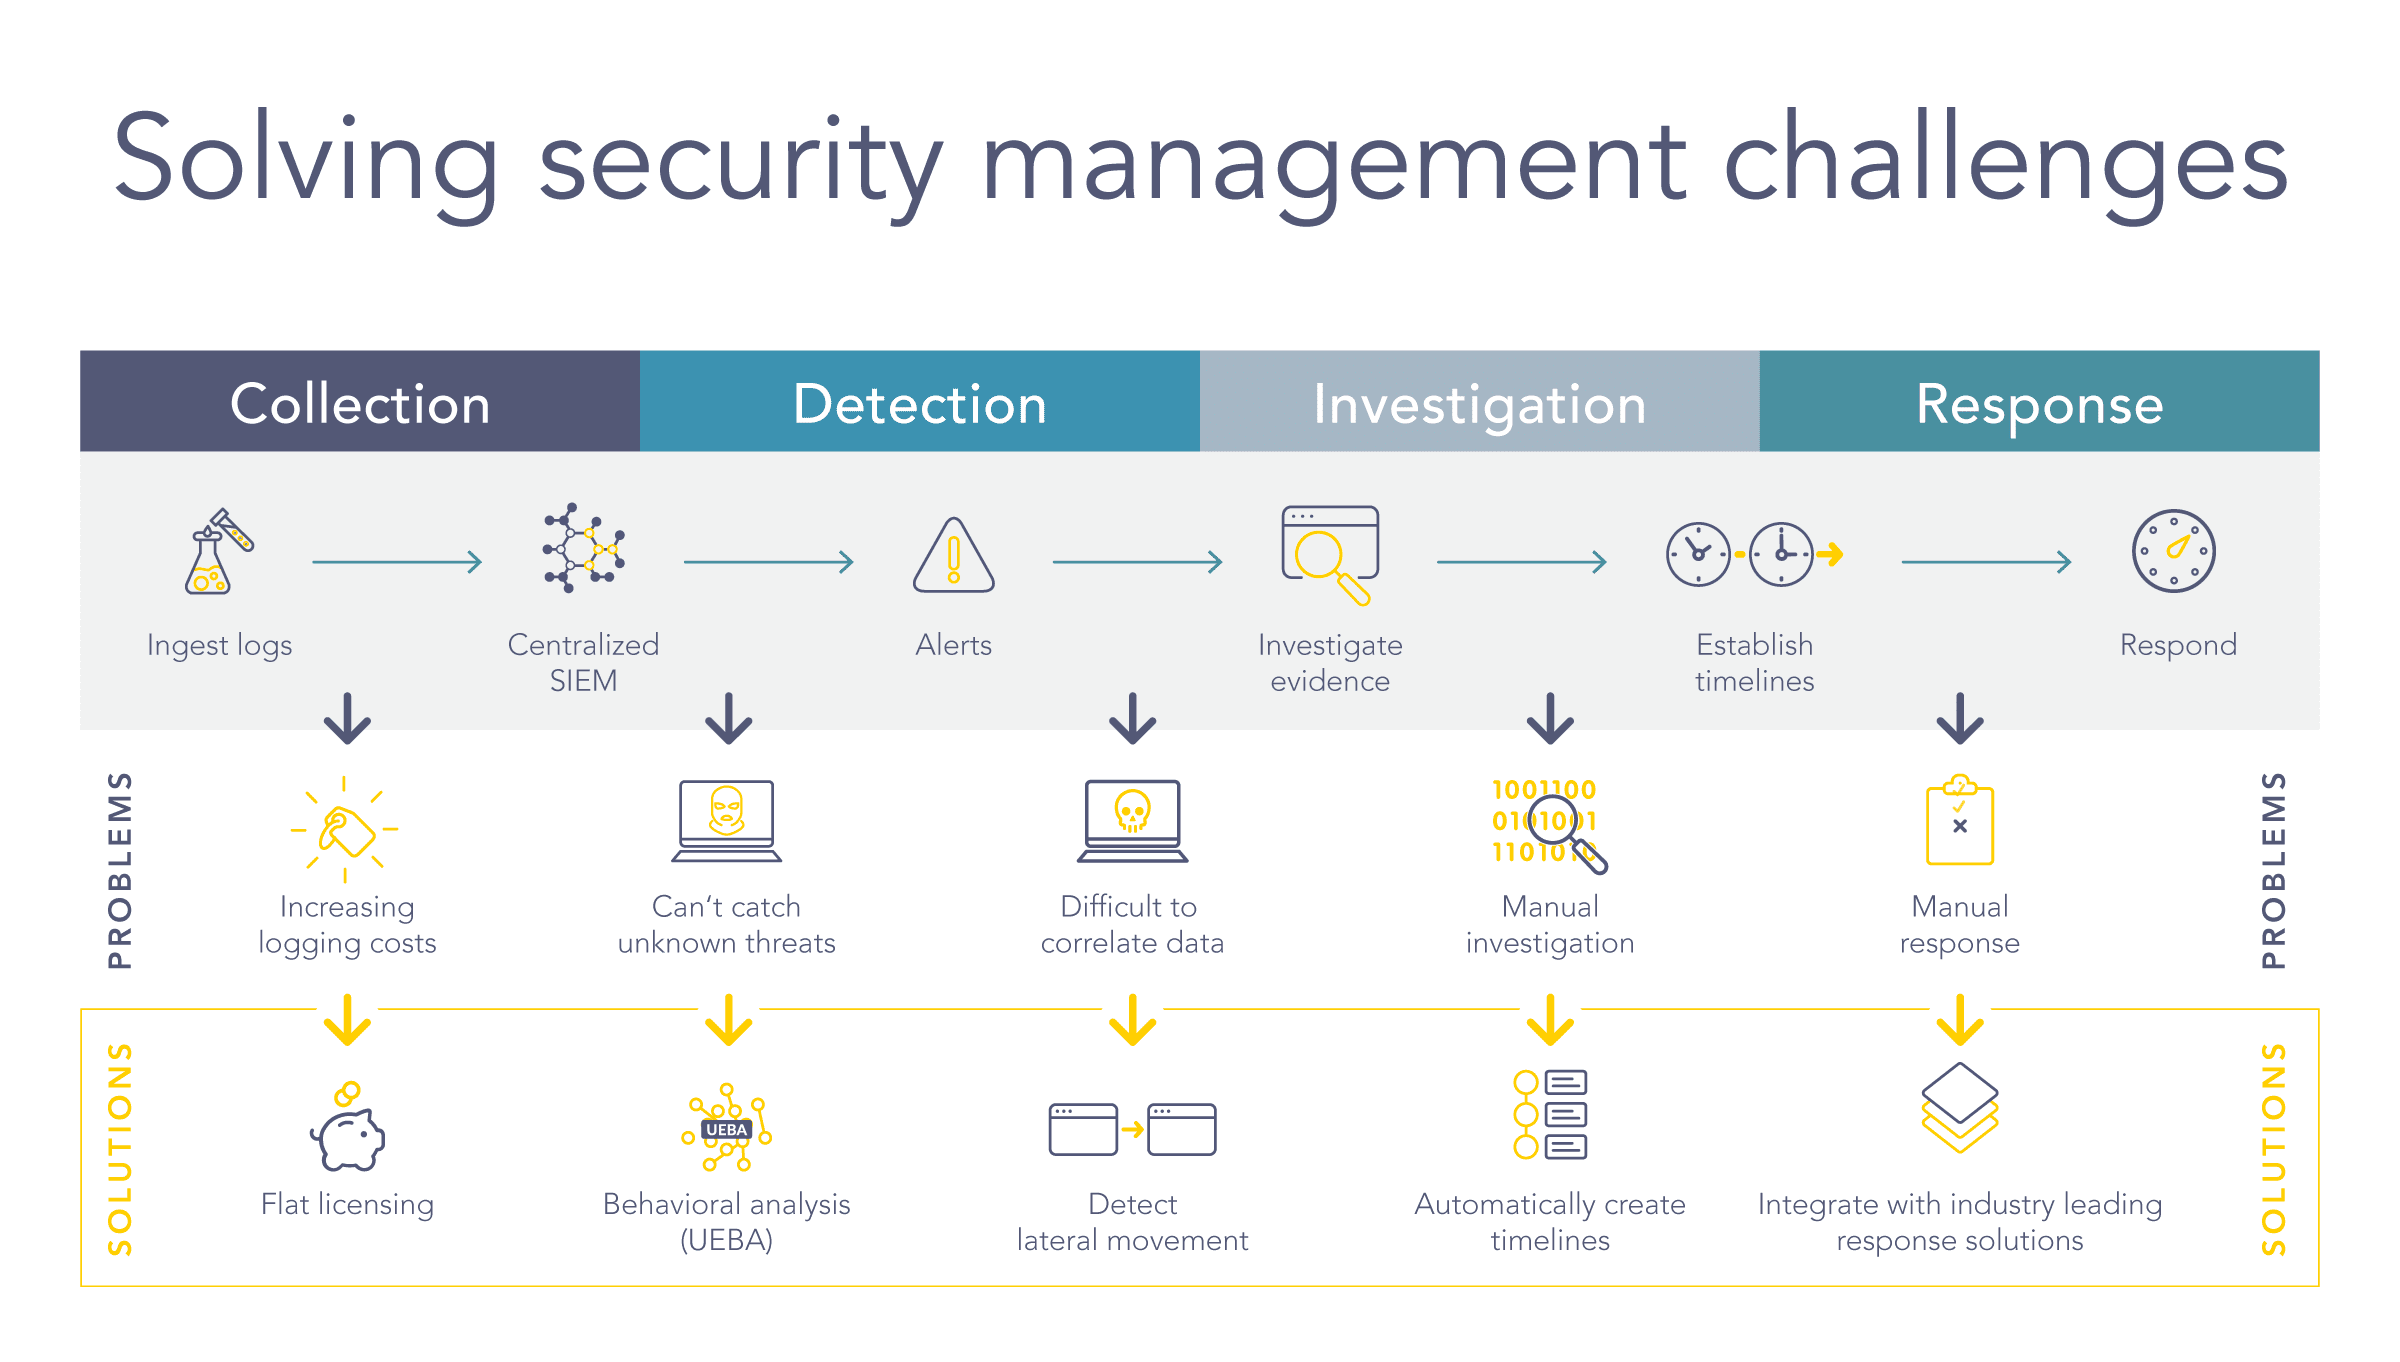 Solving Security Management Challenges step by step